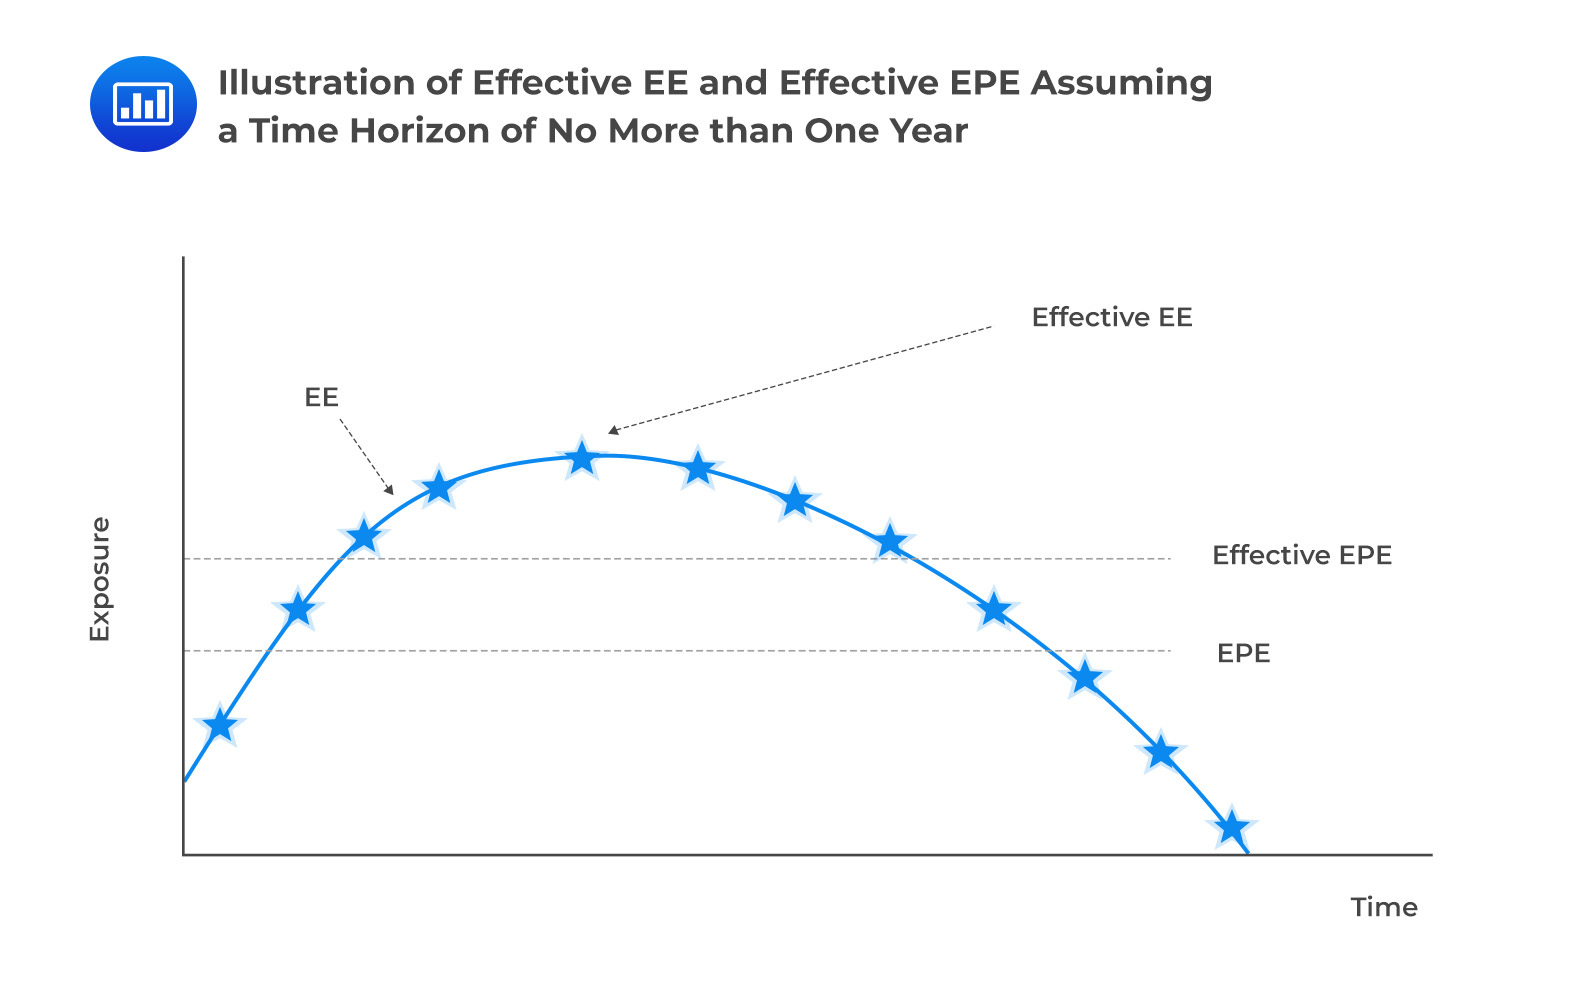 Illustration of Effective EE and Effective EPE assuming a Time Horizon of No more than one year